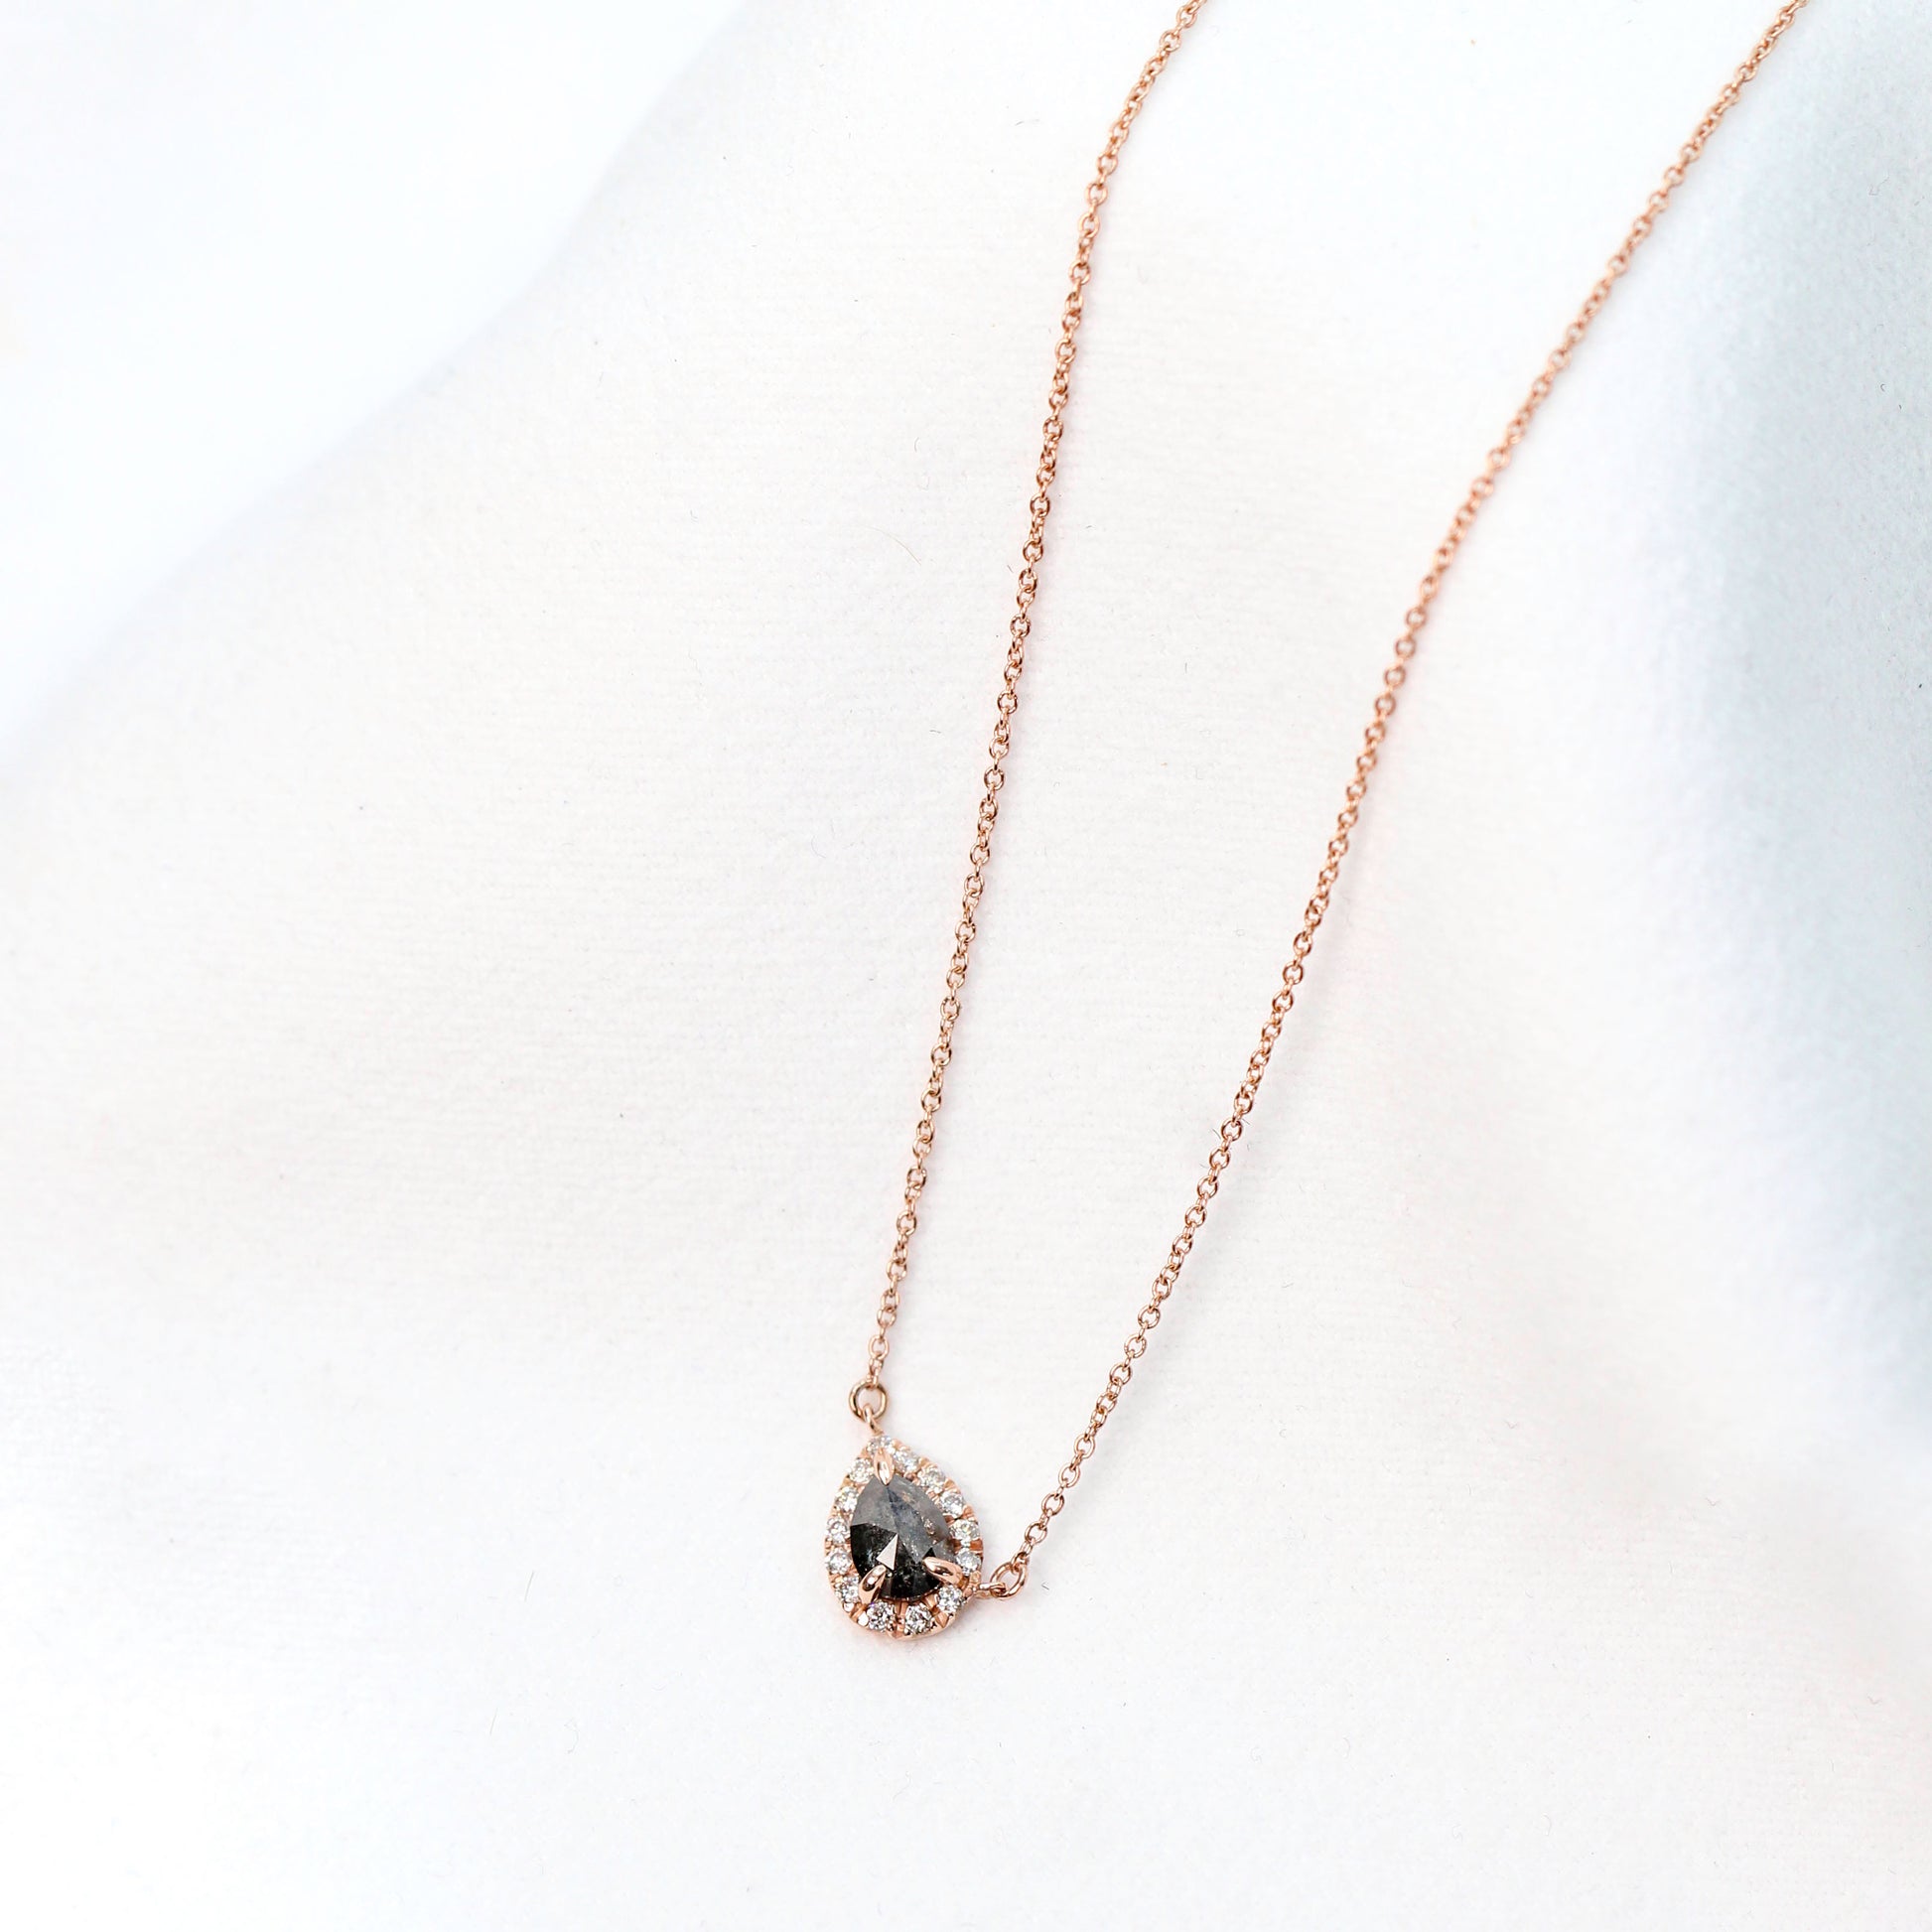 14k Rose Gold Pendant Necklace with a 0.73 Carat Pear Celestial Diamond - Midwinter Co. Alternative Bridal Rings and Modern Fine Jewelry